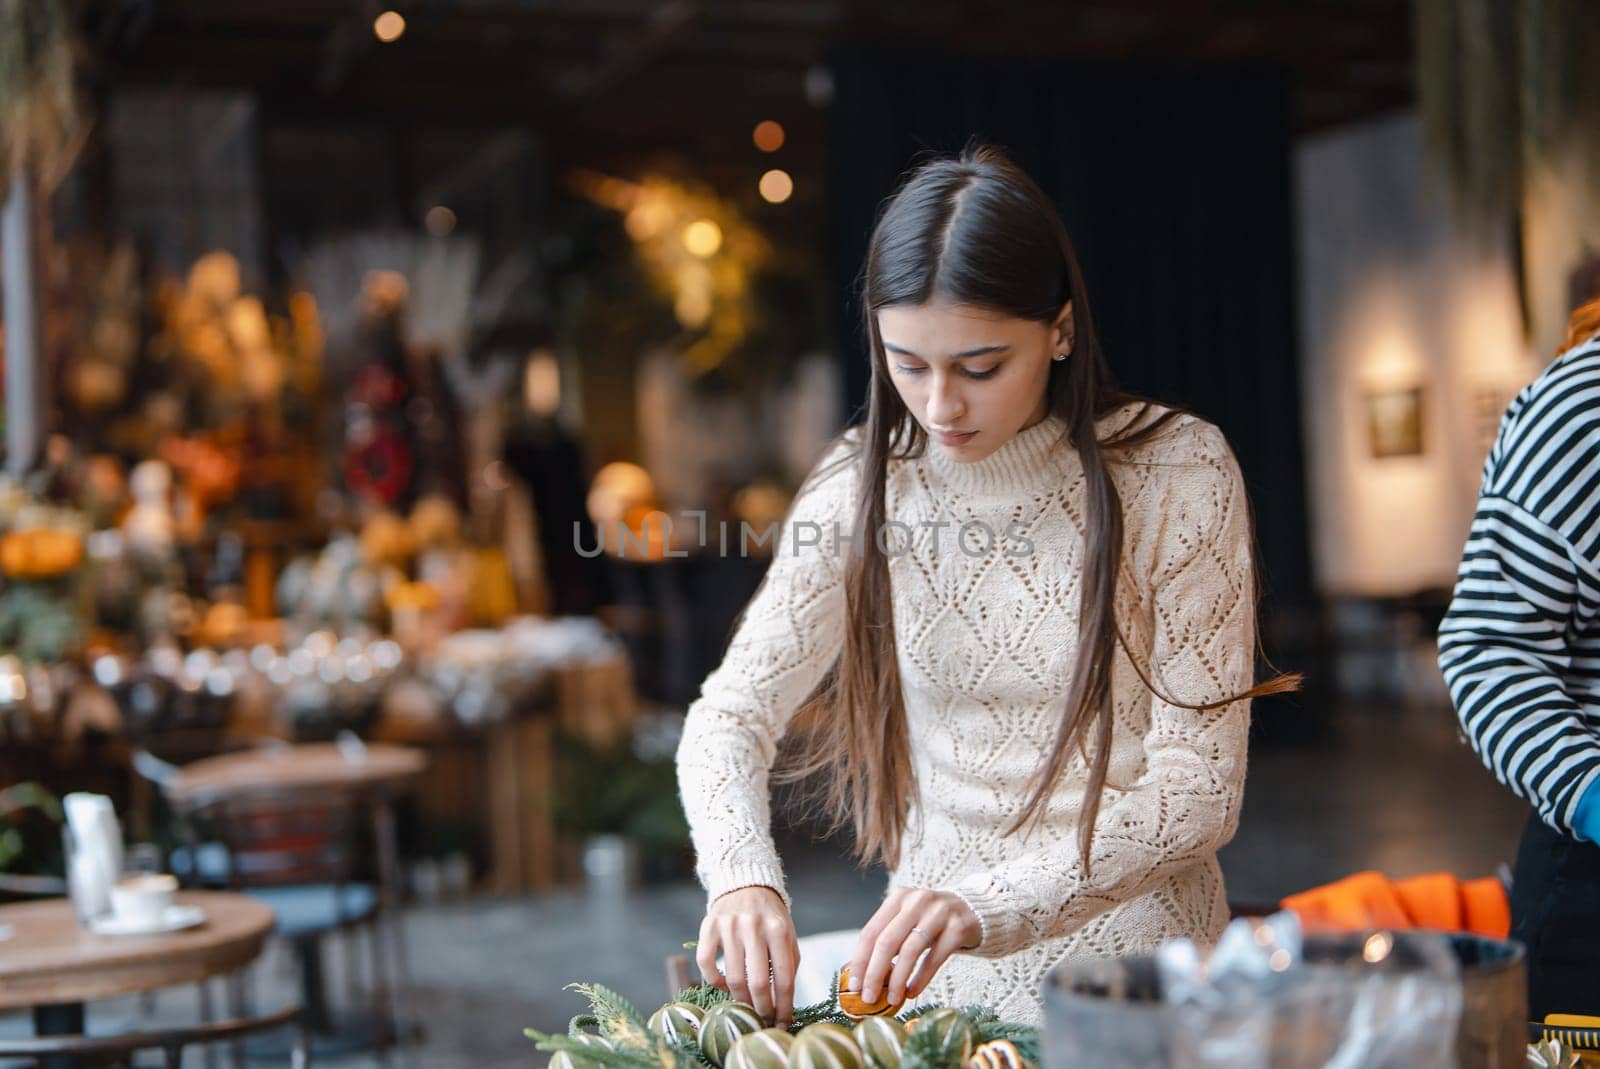 The last steps in completing the Christmas wreath at the flower shop counter. High quality photo